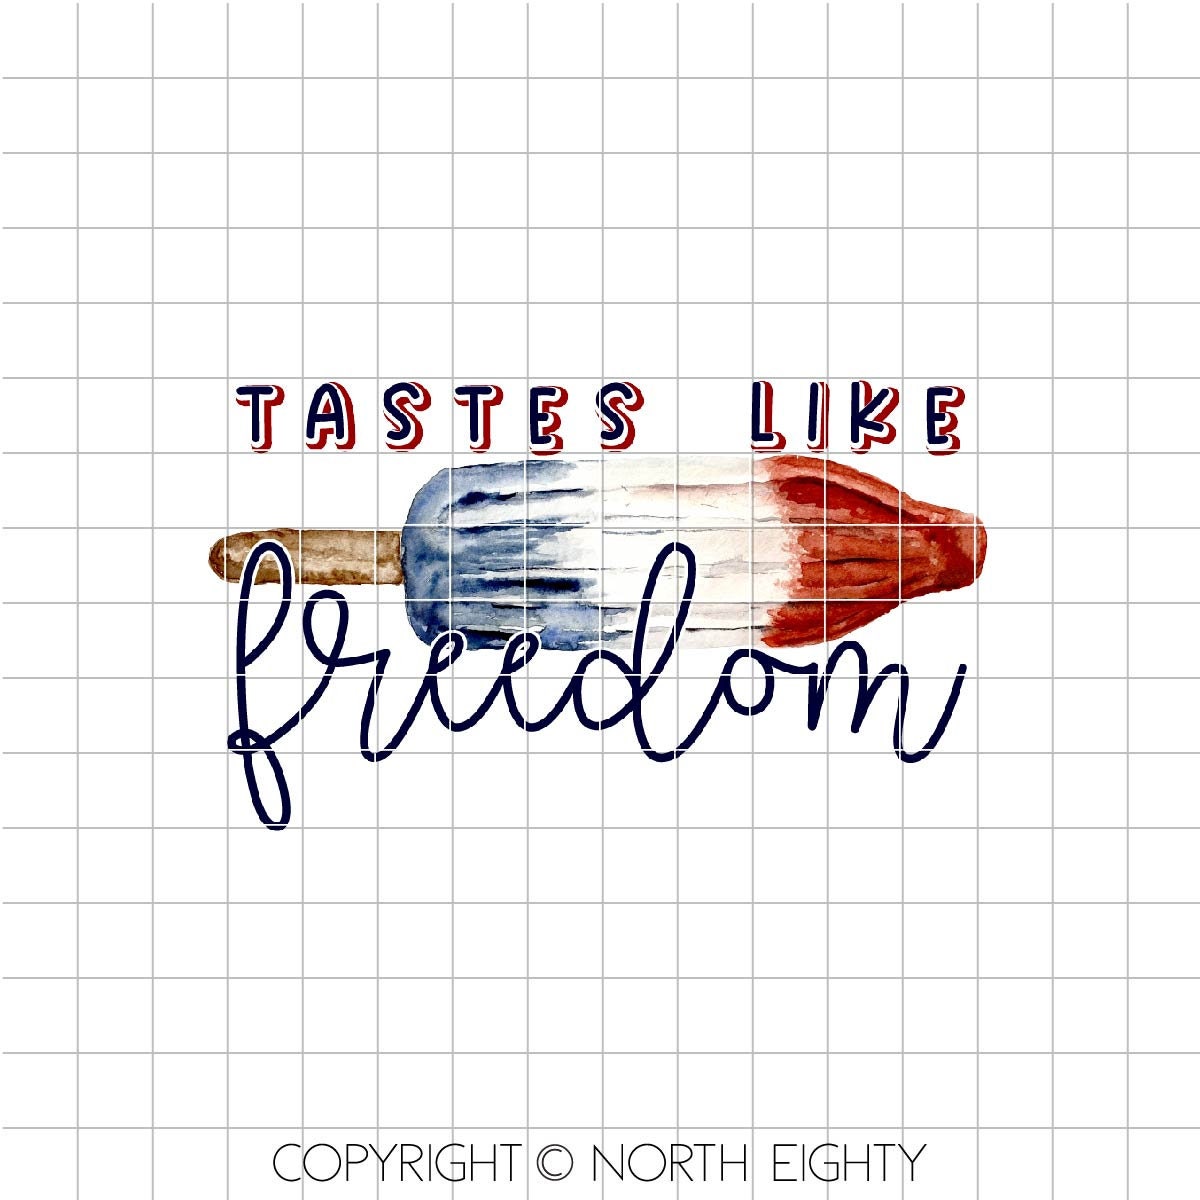 4th of July png - Tastes Like Freedom Sublimation Design - Sublimation Download - Patriotic - 4th of July - Popsicle - 4th png - Sublimation